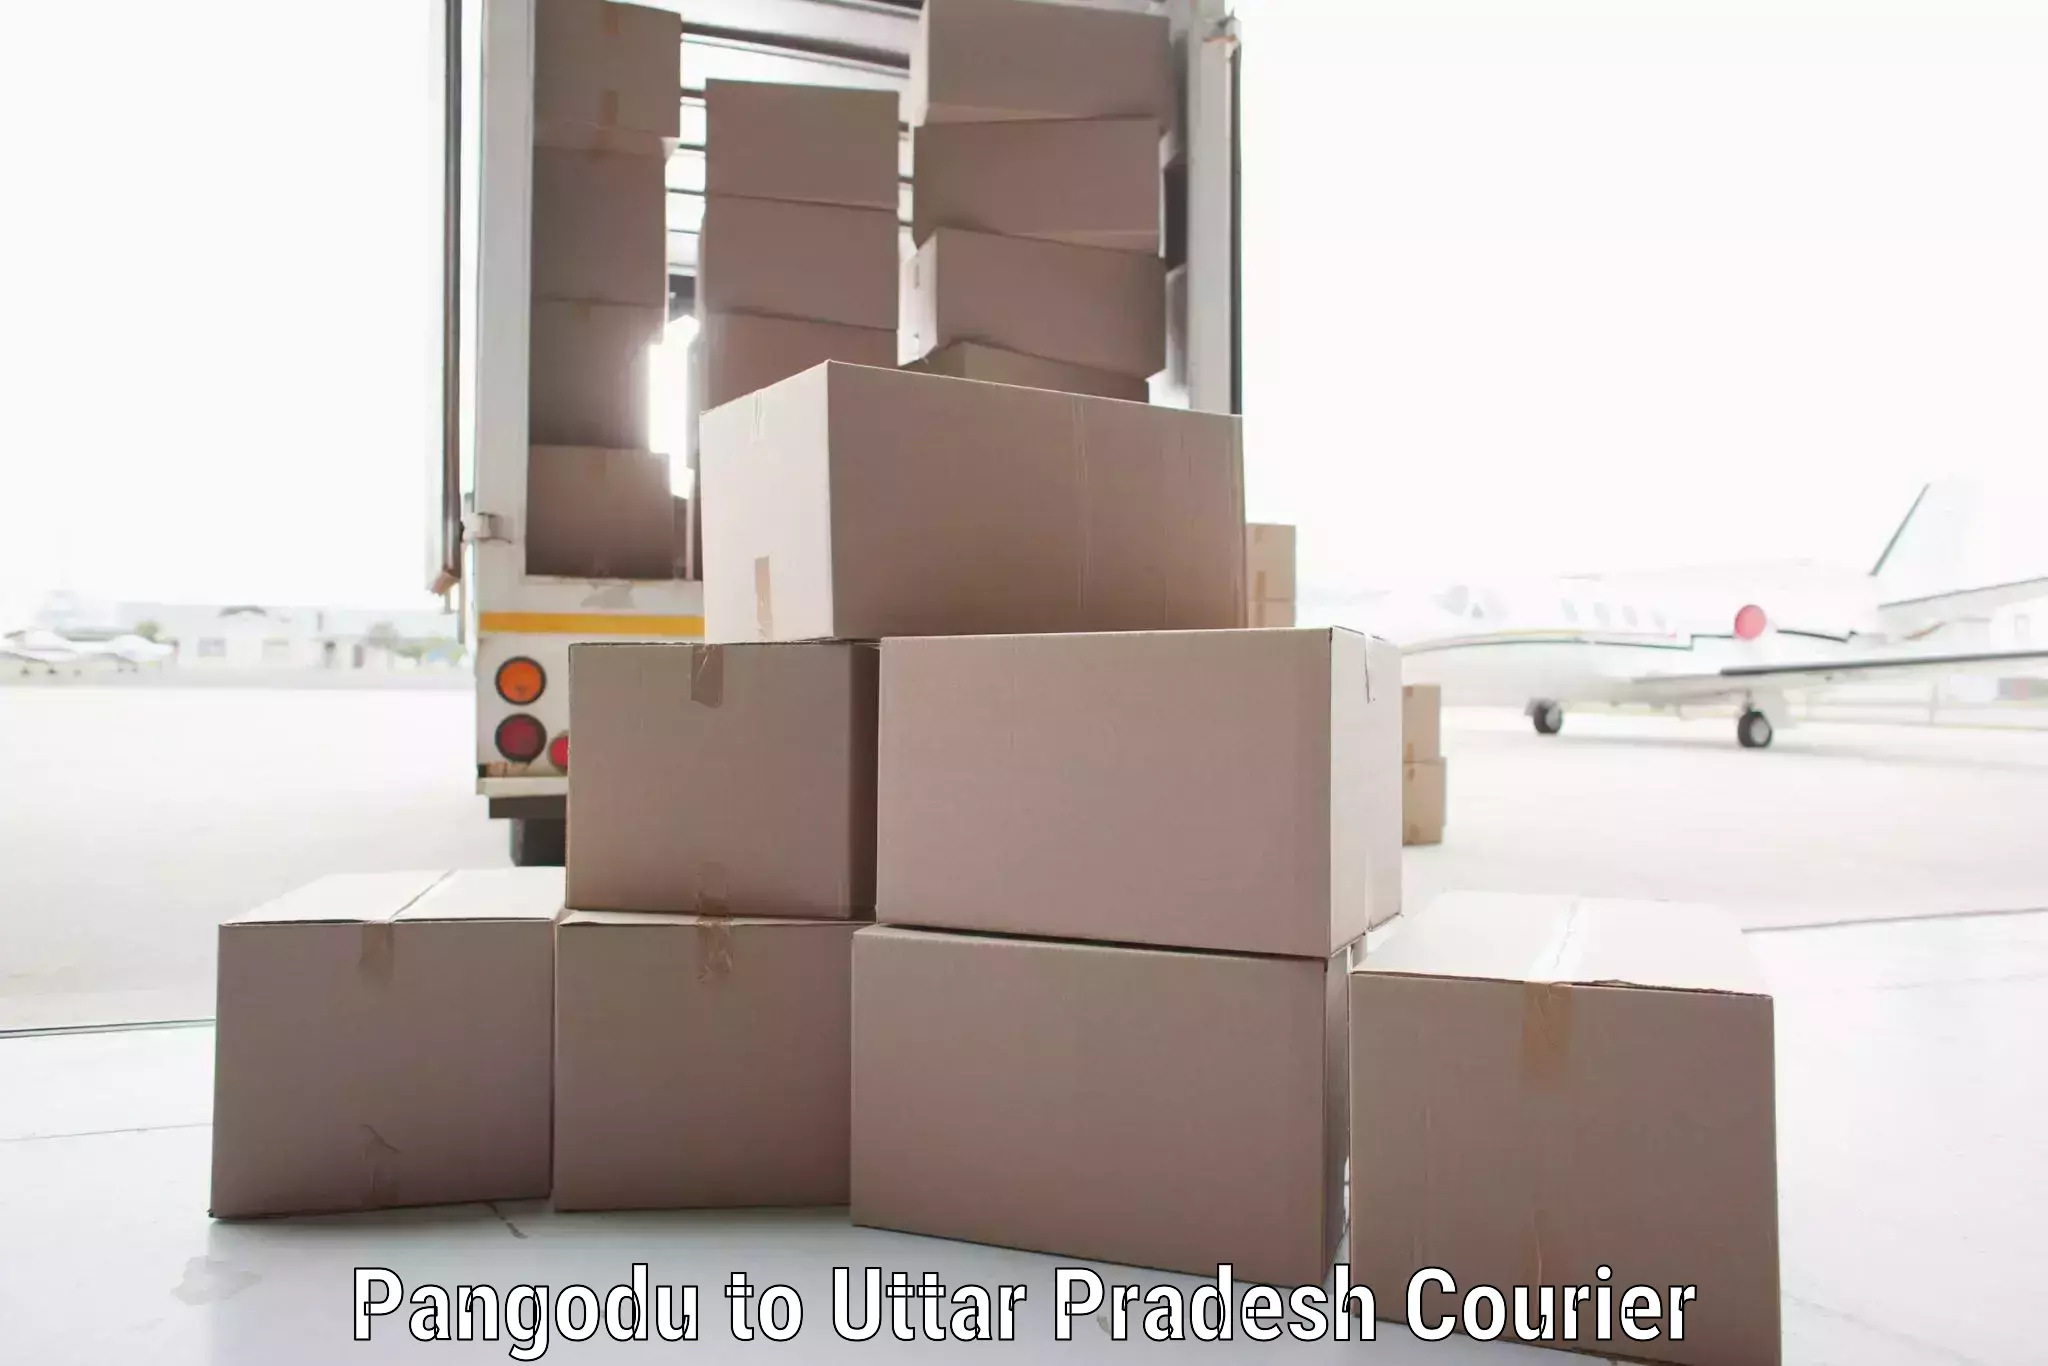 Full-service courier options Pangodu to Aliganj